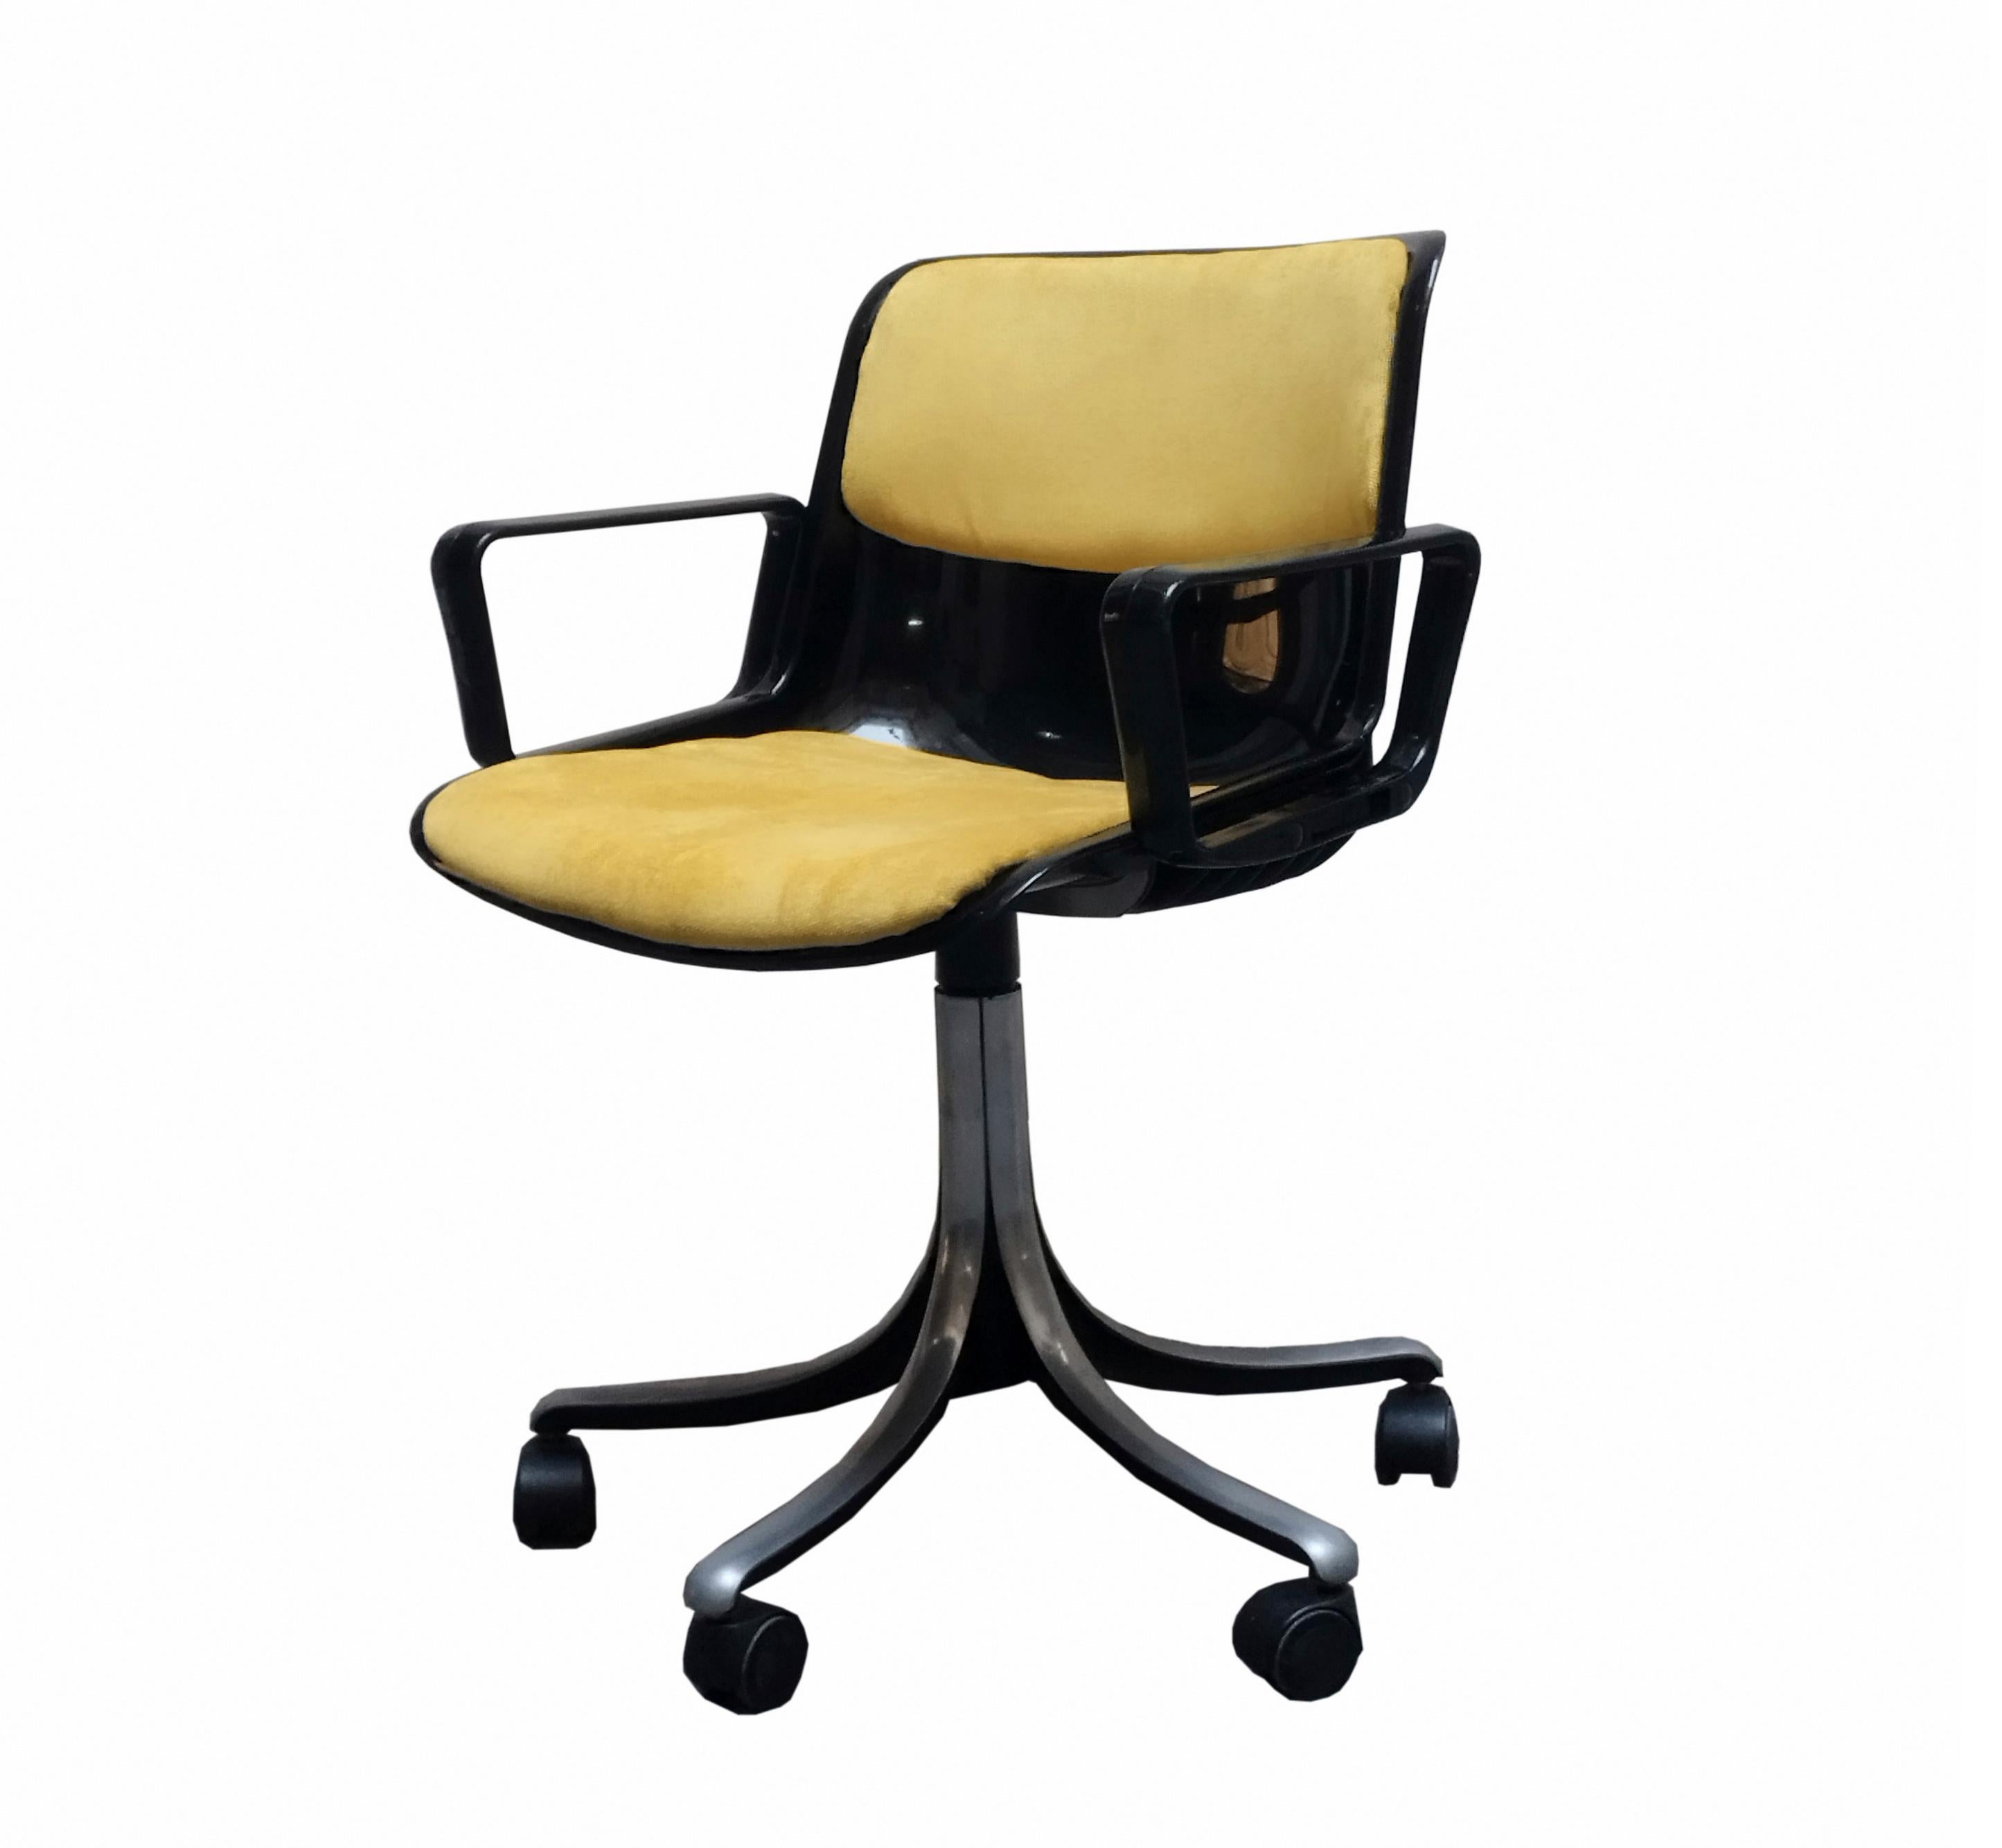 Rare yellow Modus office chair with armrests and adjustable height, designed by Osvaldo Borsani and produced for Tecno 1970. 